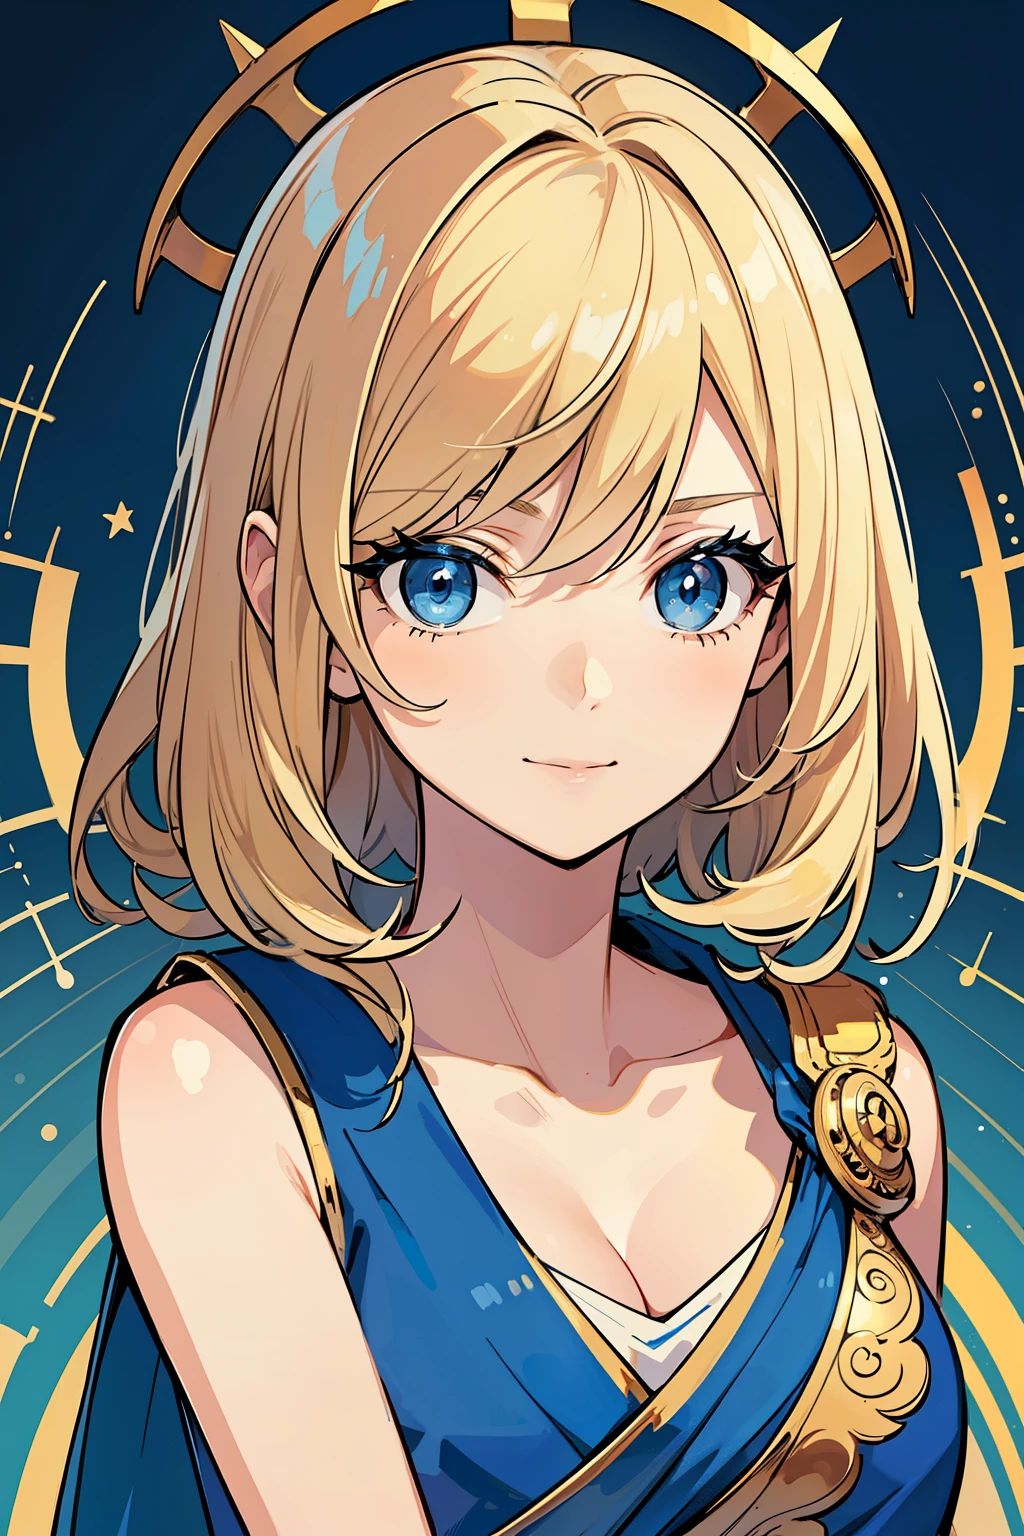 (high-quality, breathtaking),(expressive eyes, perfect face) 1girl, girl, solo, young adult, blonde hair, blue coloured eyes, stylised hair, gentle smile, medium length hair, loose hair, side bangs, curley hair, really spiky hair, spiked up hair, looking at viewer, portrait, ancient greek clothes, blue black and white tunic, white Chlamys, sleeveless, greek, blue and gold sash, music inspired background, related to Orpheus, C cup size breasts